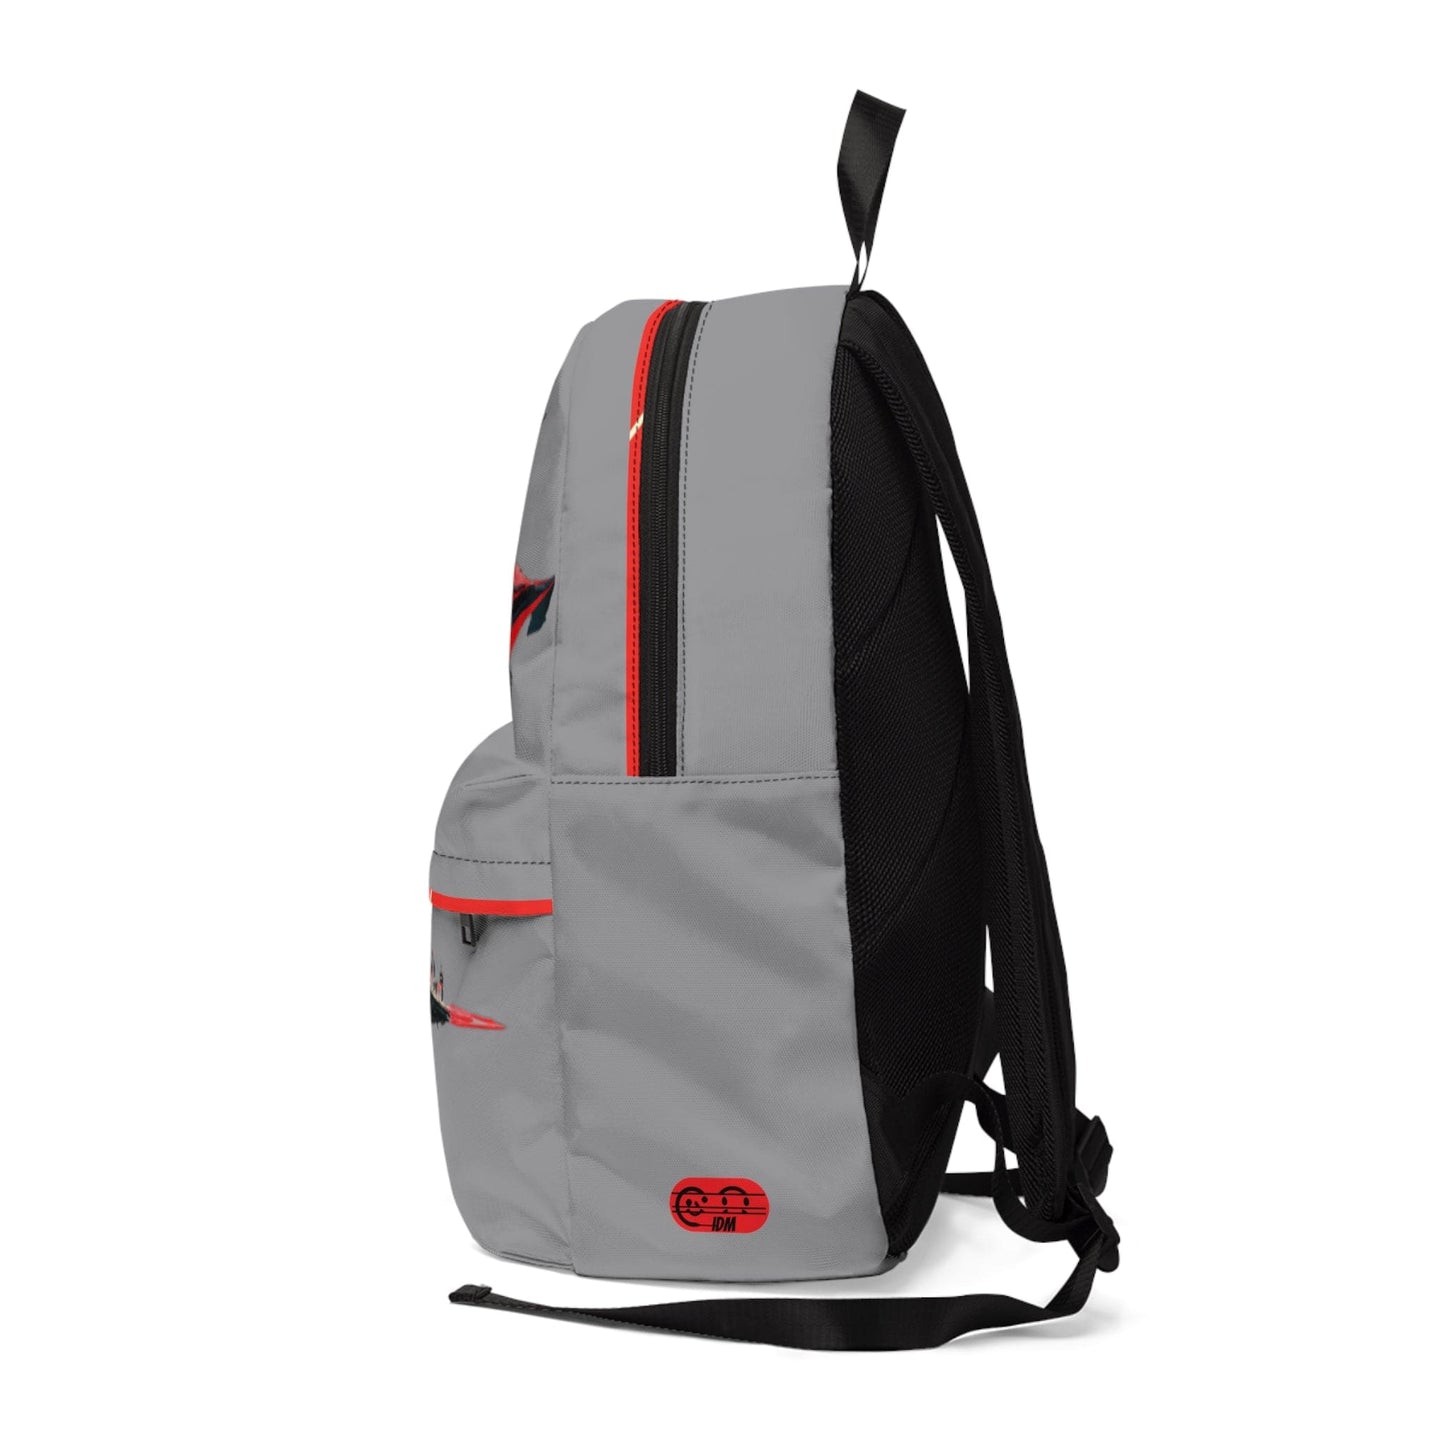 IDMENTO SpaceBound backpack [Moon gray]